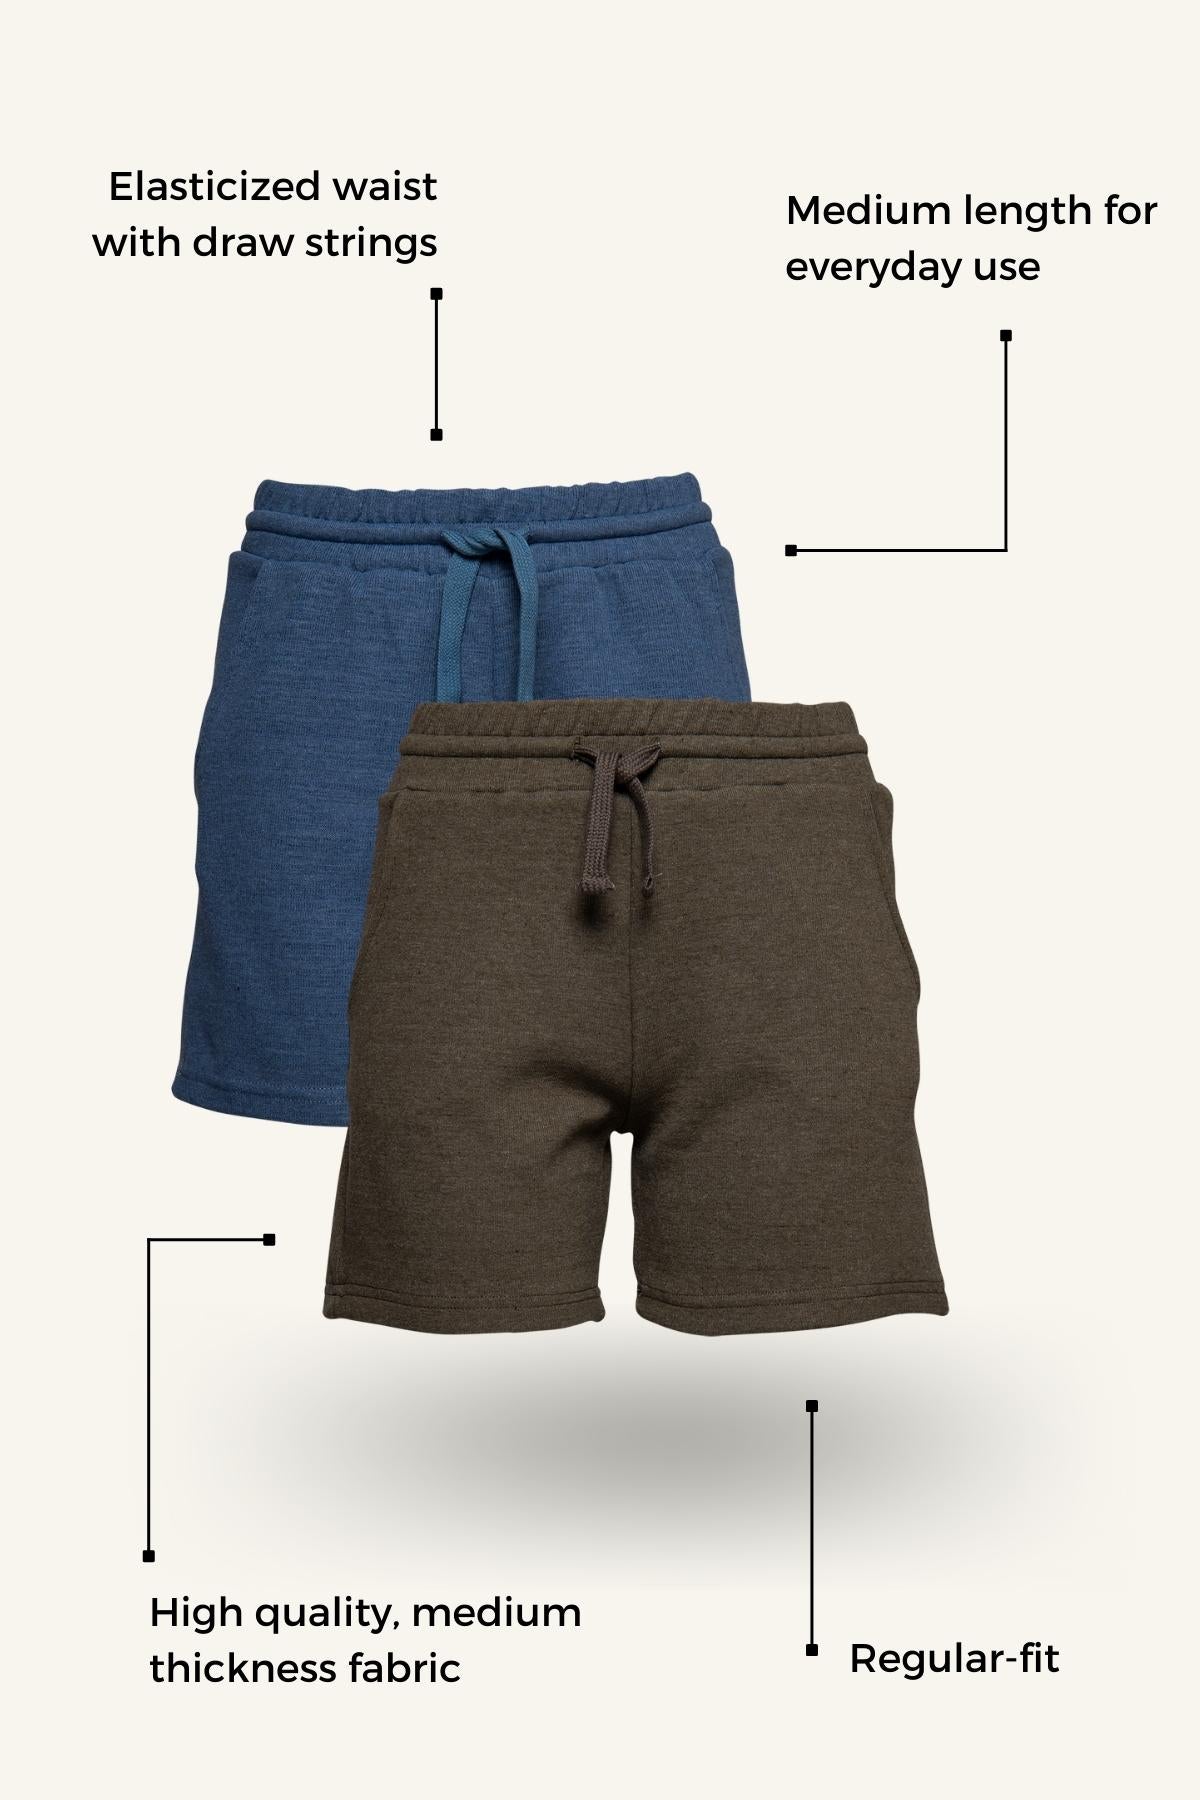 straight-shorts-infographic